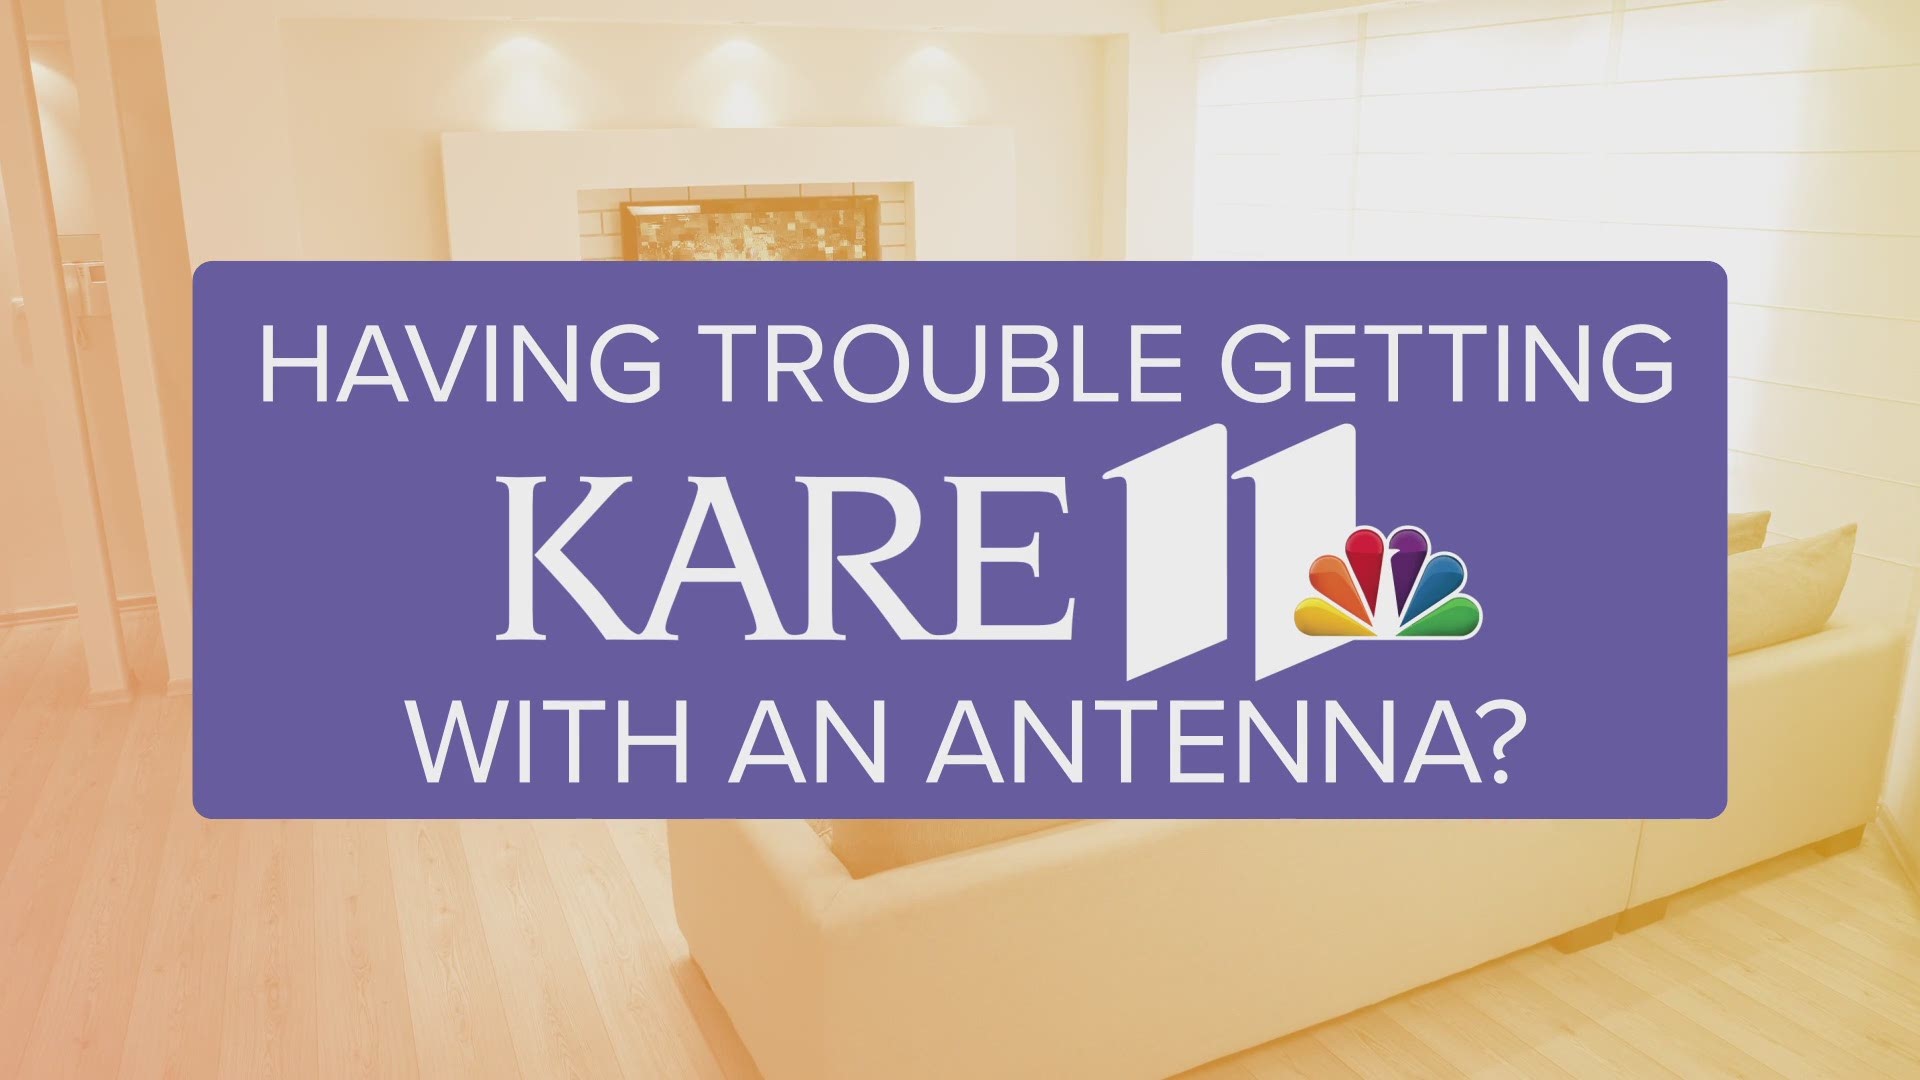 Here's a step-by-step guide to getting KARE 11 via an antenna, just in time for Thursday Night Football.